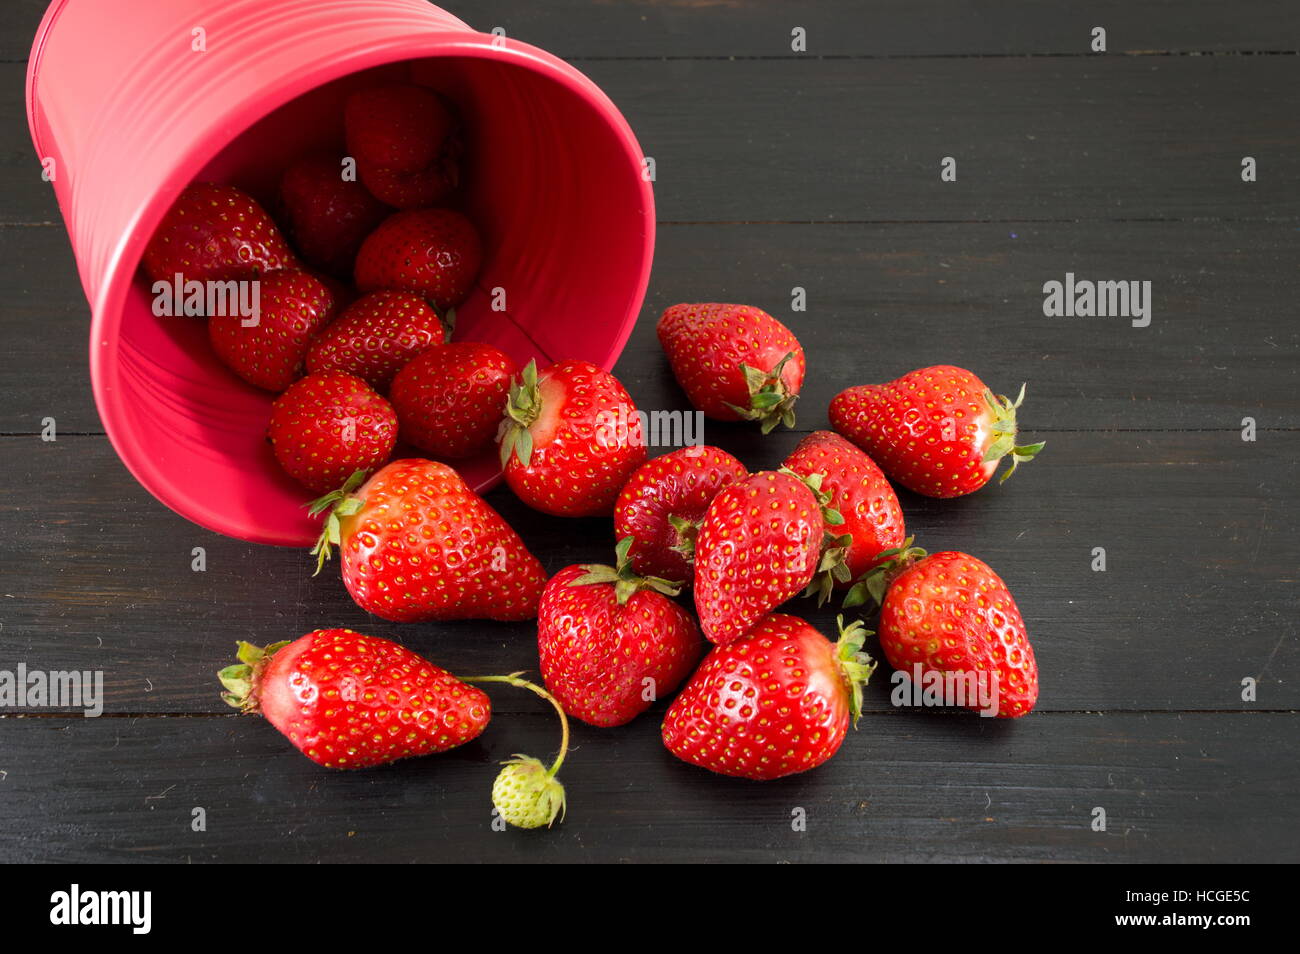 strawberries falling out of a red bucket on a black table Stock Photo